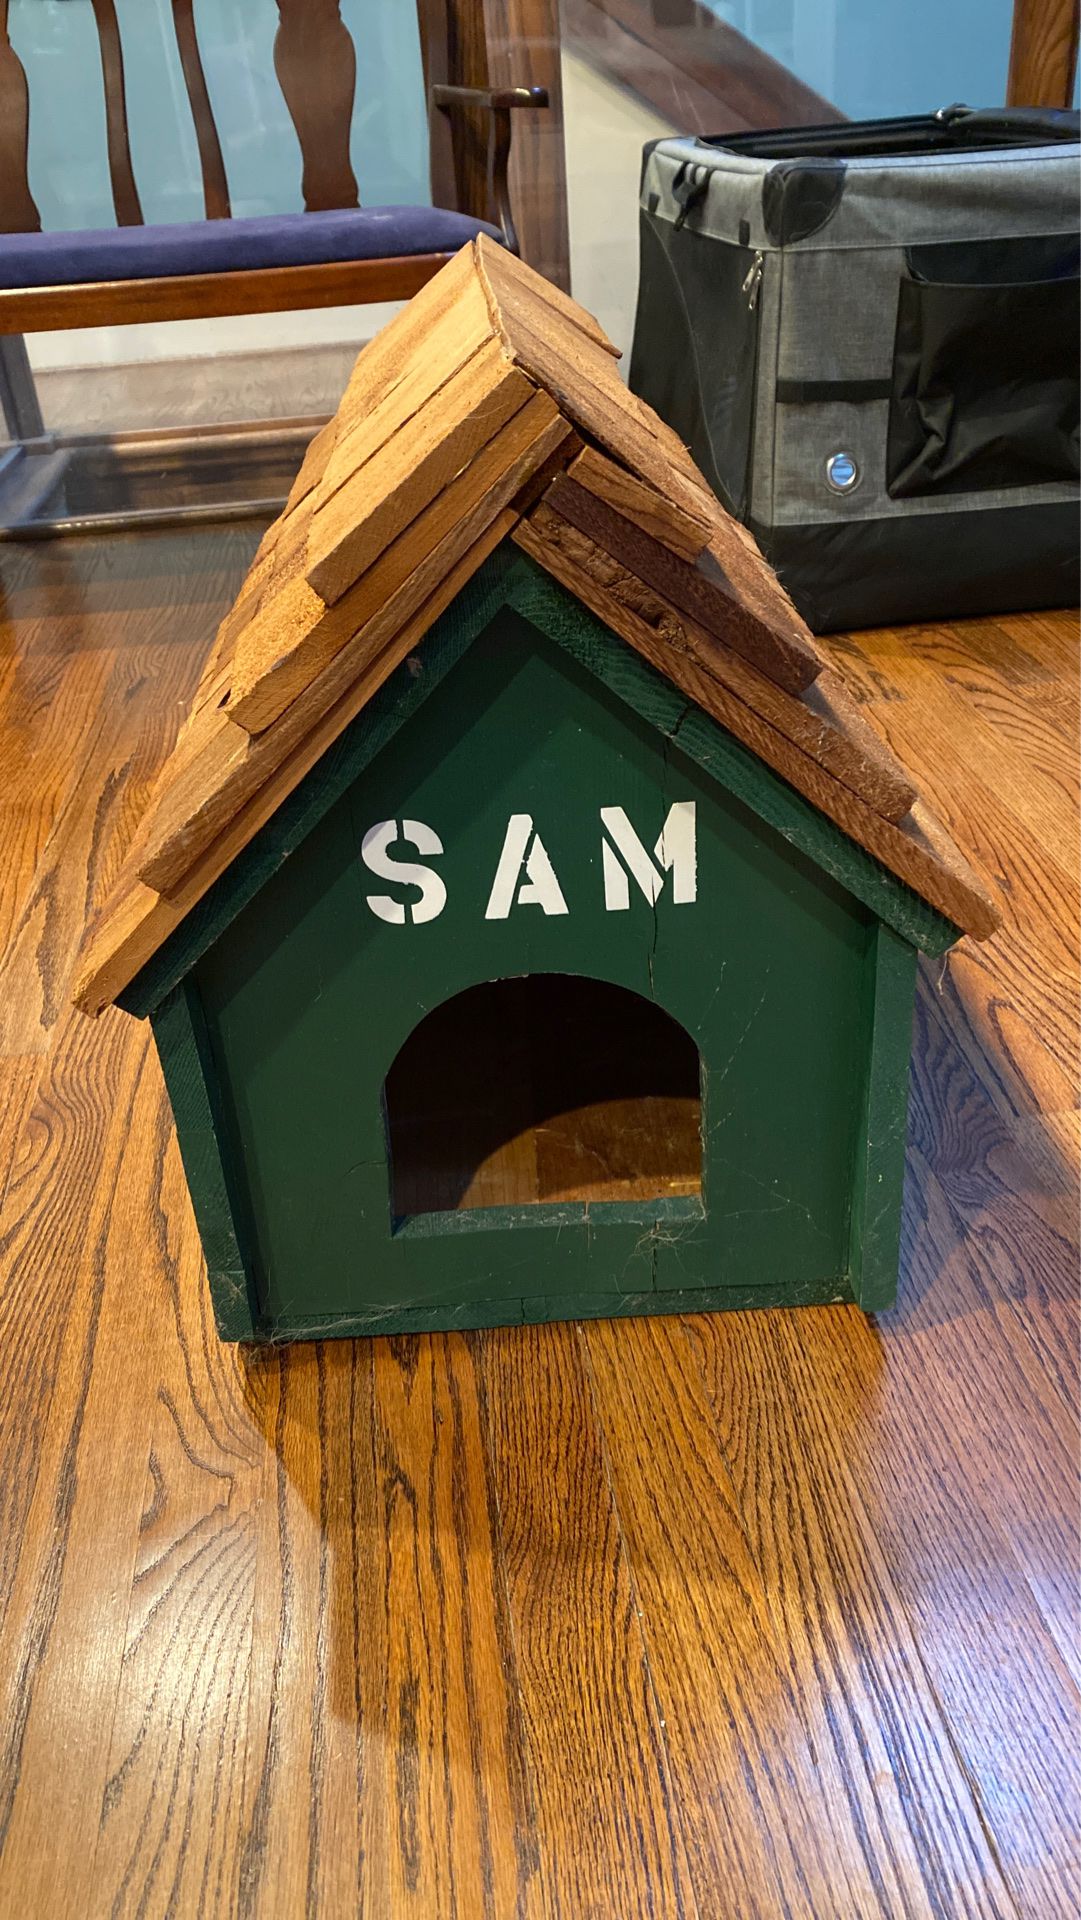 Cat house or small dog house. Hand made ALL wood. Dimensions: 20” tall, 16” wide, 20” long. Pet entrance is 6 1/2” wide and 6” tall. Excellent